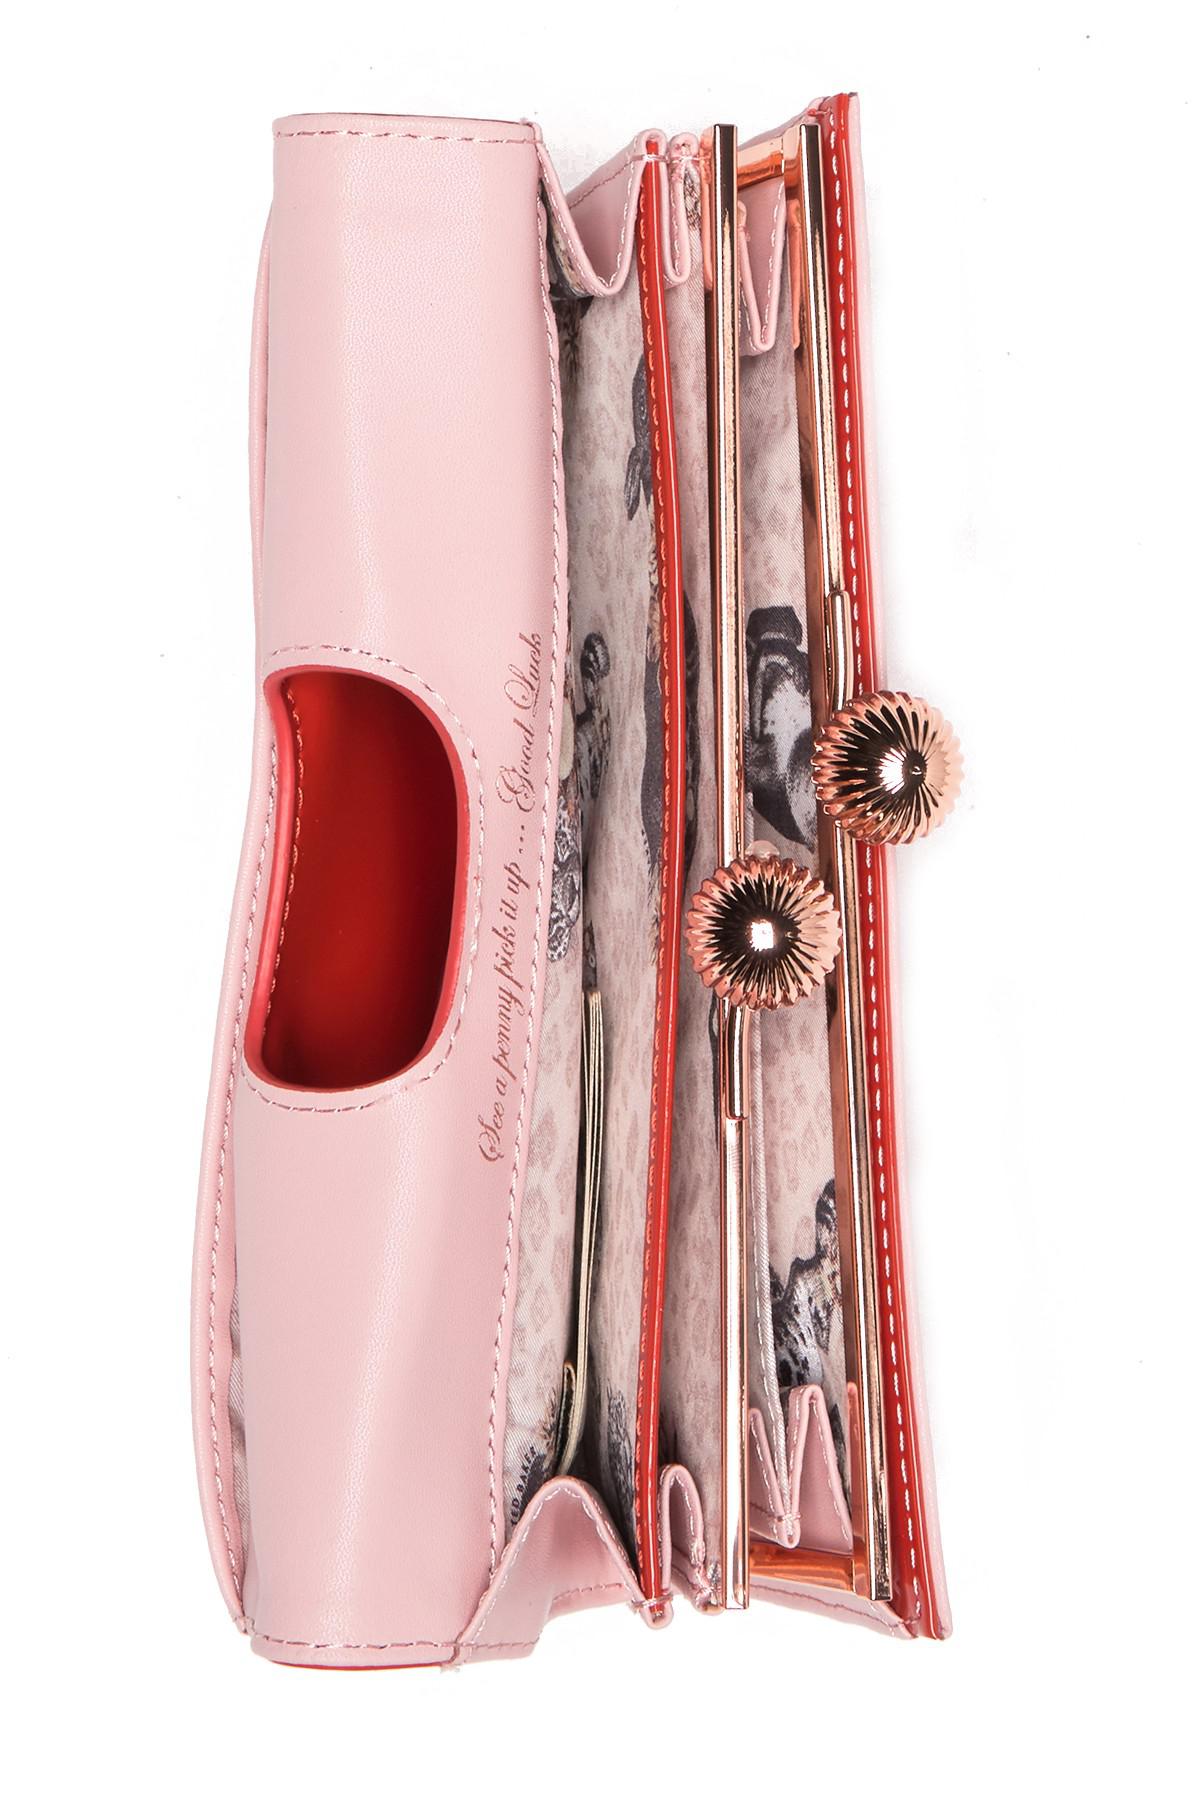 Ted Baker Bobble Patent Leather Wallet in Red - Lyst